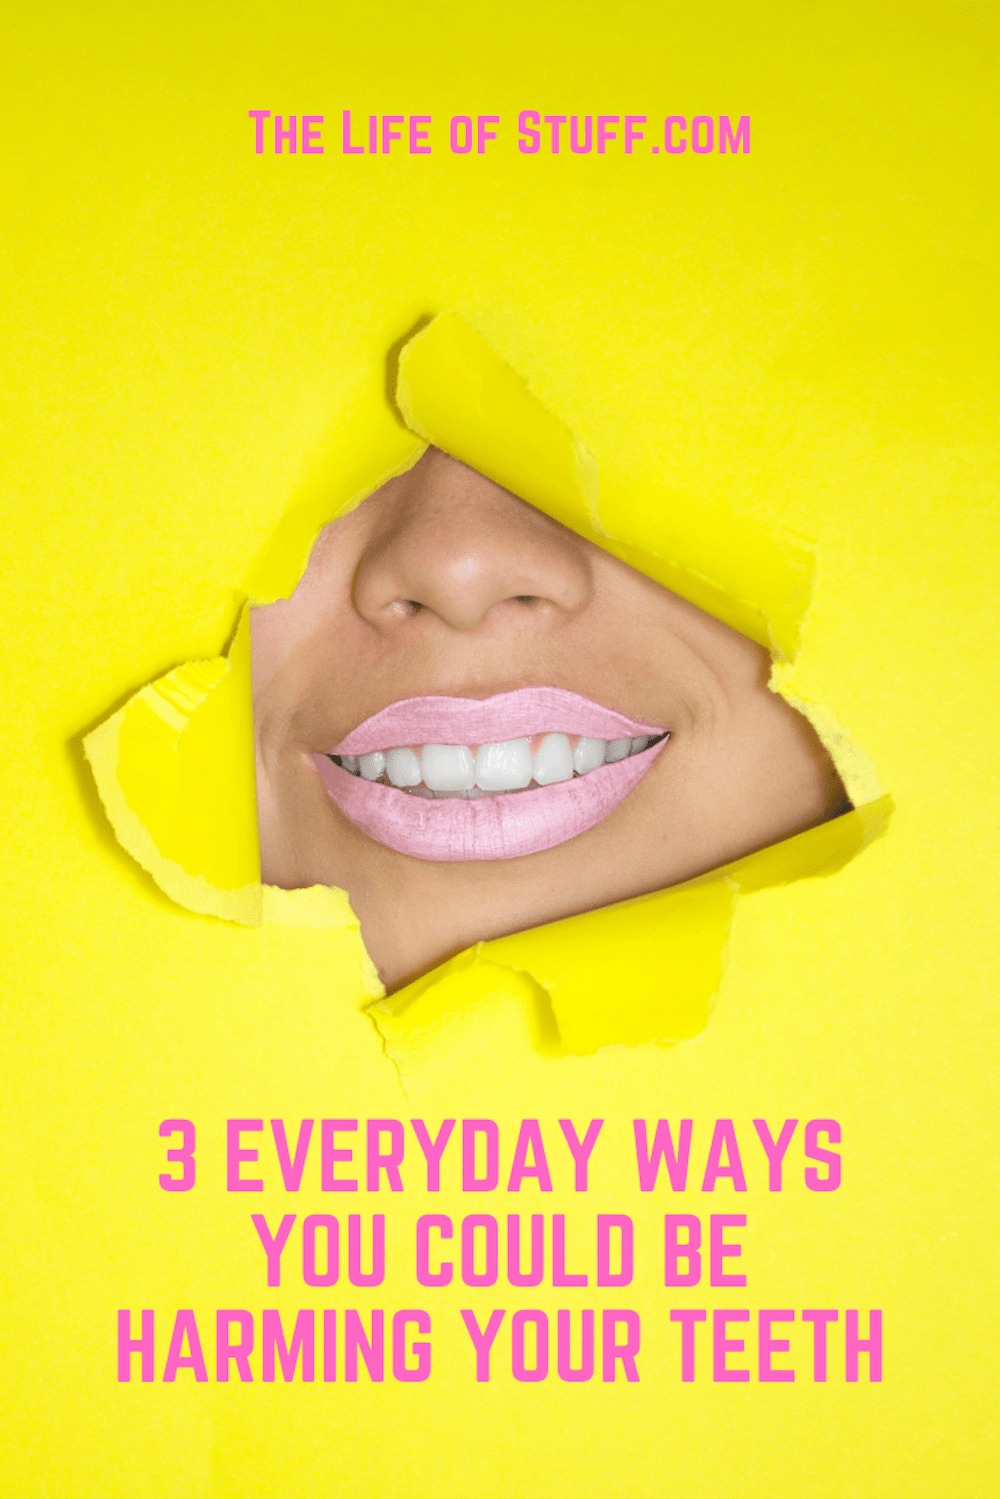 3 Everyday Ways You Could Be Harming Your Teeth - The Life of Stuff